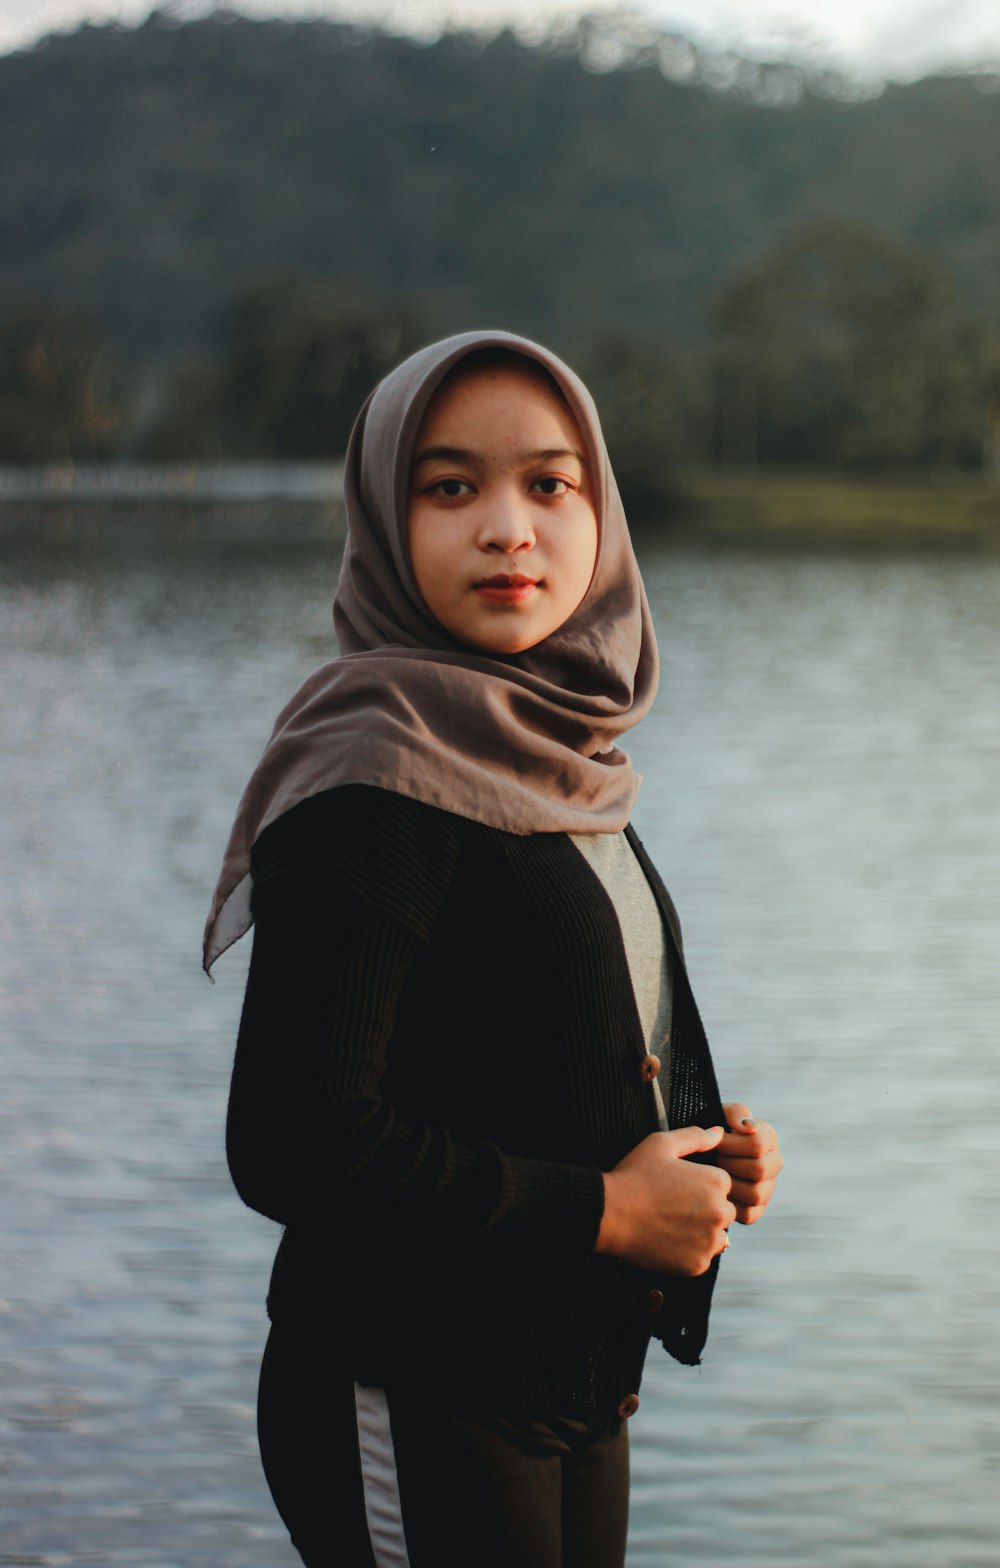 woman in brown hijab and black long sleeve shirt standing near body of water during daytime